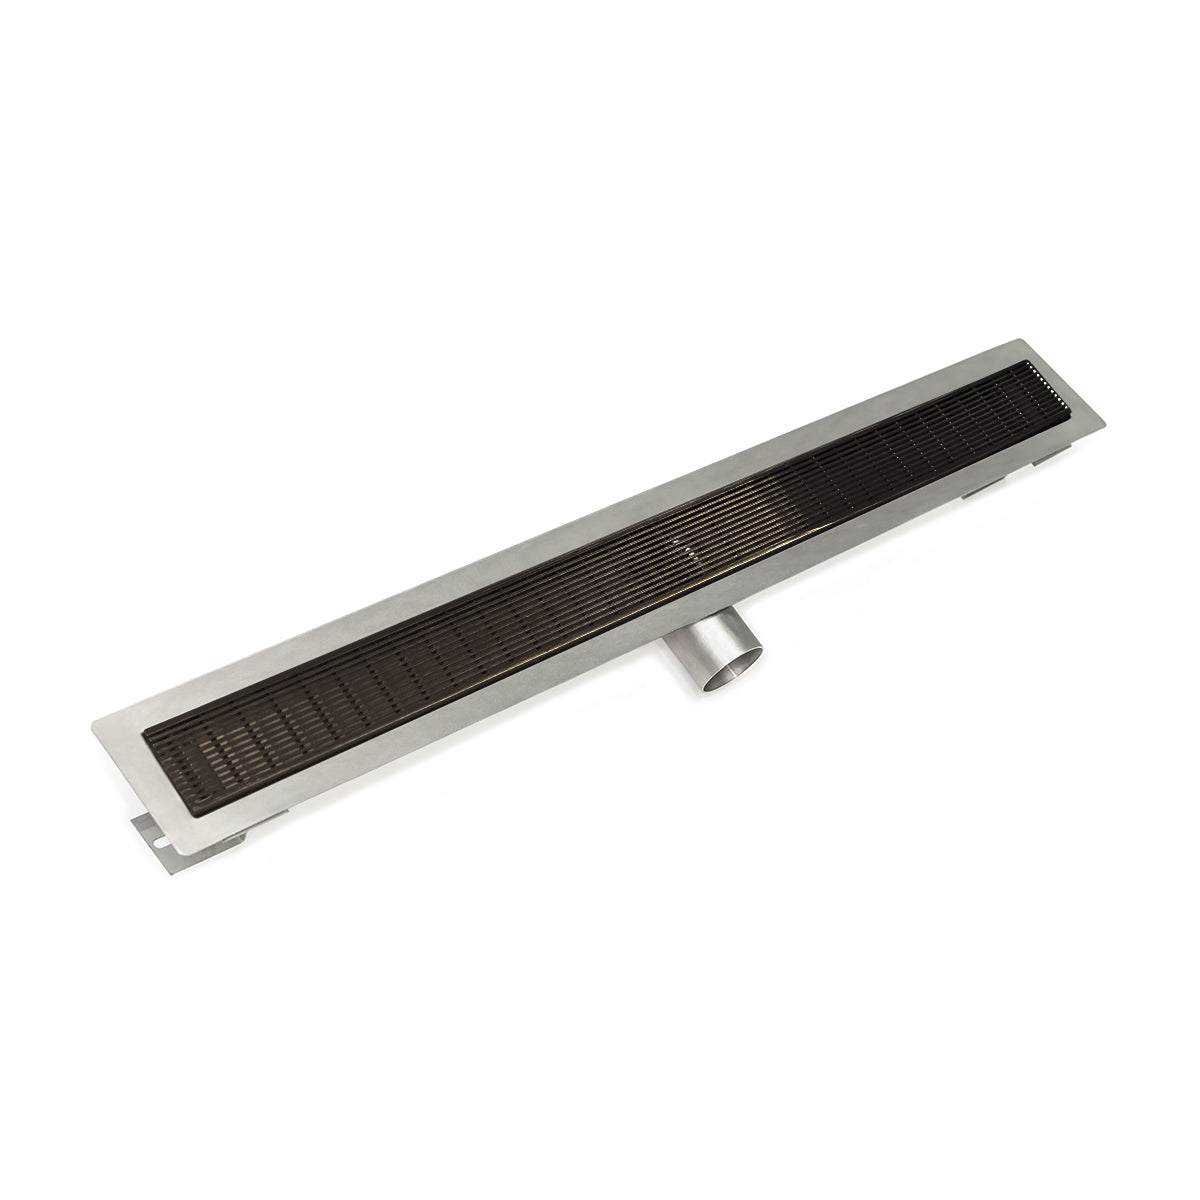 Infinity Drain 42" FT Series Side Outlet Linear Drain Kit with 2 1/2" Wedge Wire Grate